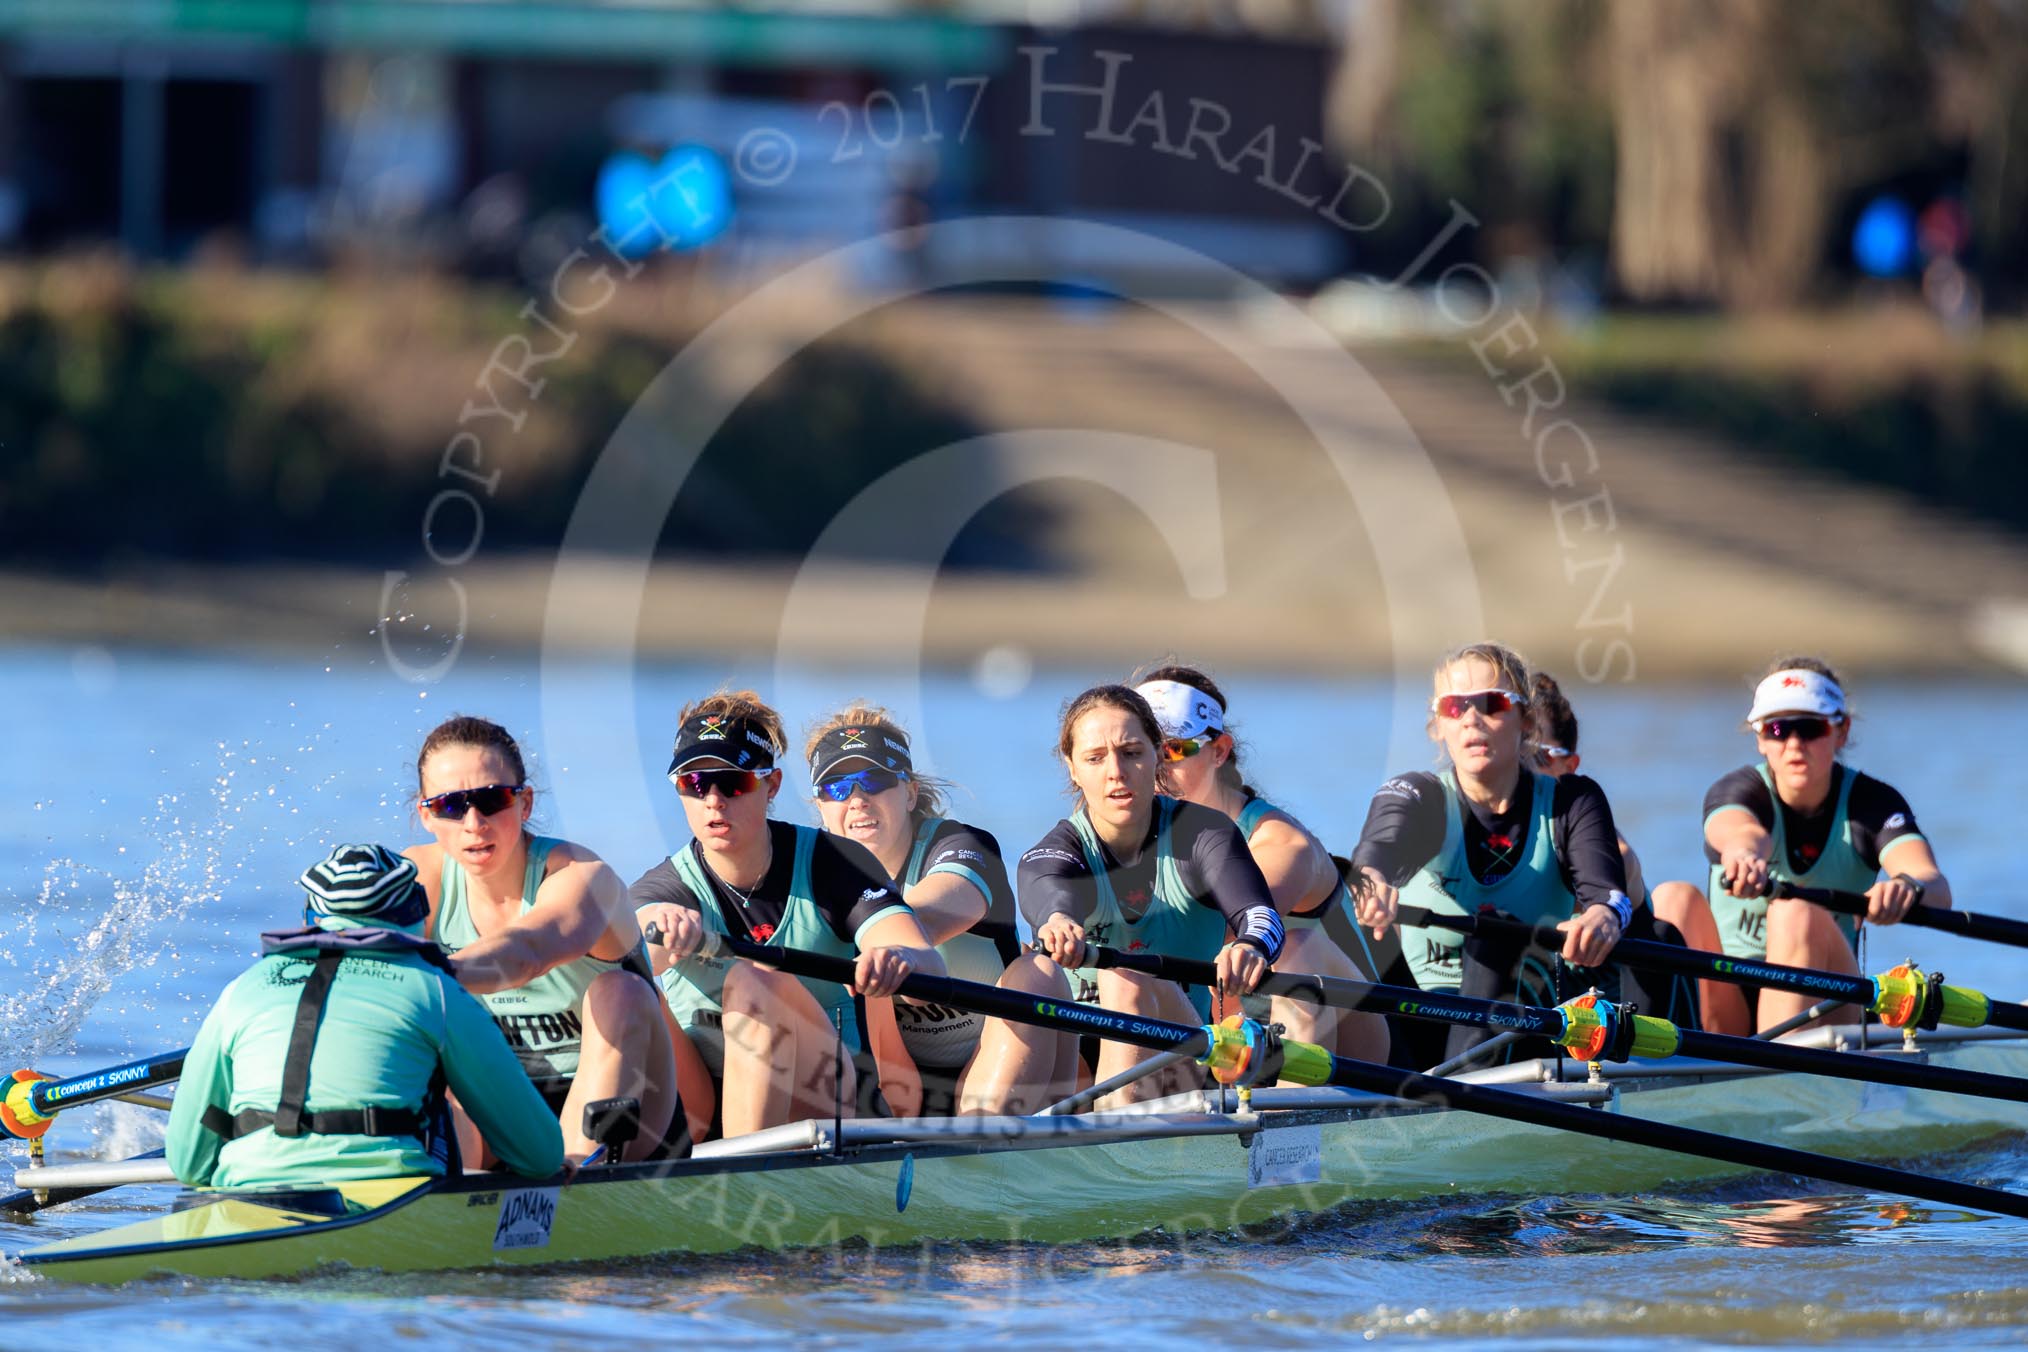 The Women's Boat Race season 2018 - fixture CUWBC vs. ULBC: CUWBC extending their lead near the Putney boat houses - cox Sophie Shapter, stroke Tricia Smith, 7 Imogen Grant, 6 Anne Beenken, 5 Thea Zabell, 4 Paula Wesselmann, 3 Alice White, 2 Myriam Goudet-Boukhatmi, bow Olivia Coffey.
River Thames between Putney Bridge and Mortlake,
London SW15,

United Kingdom,
on 17 February 2018 at 13:11, image #63